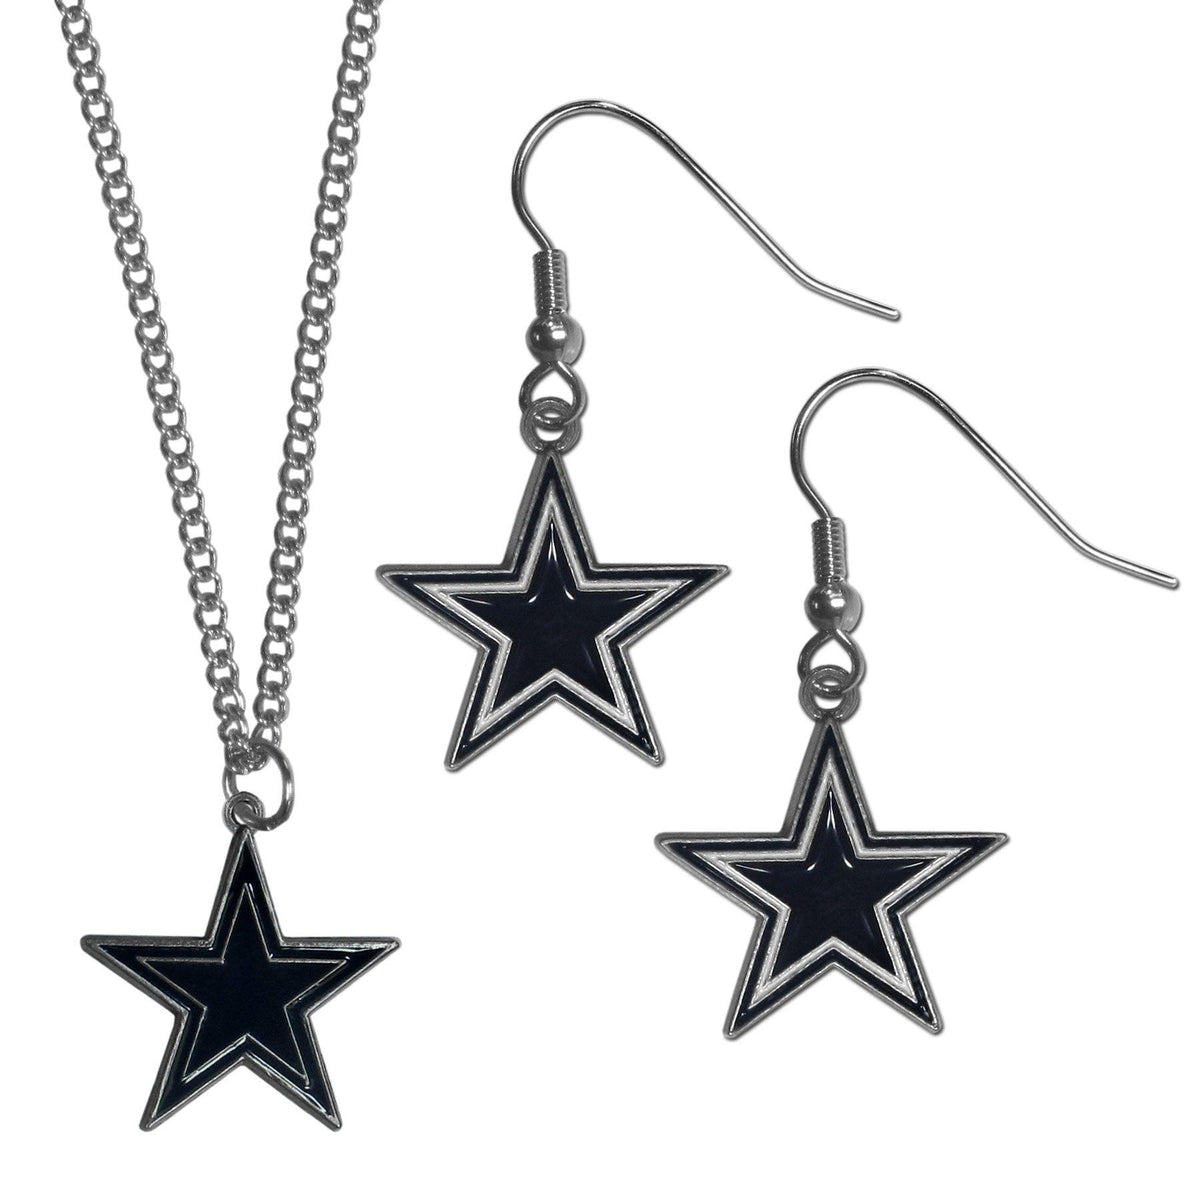 Dallas Cowboys Dangle Earrings and Chain Necklace Set - Flyclothing LLC